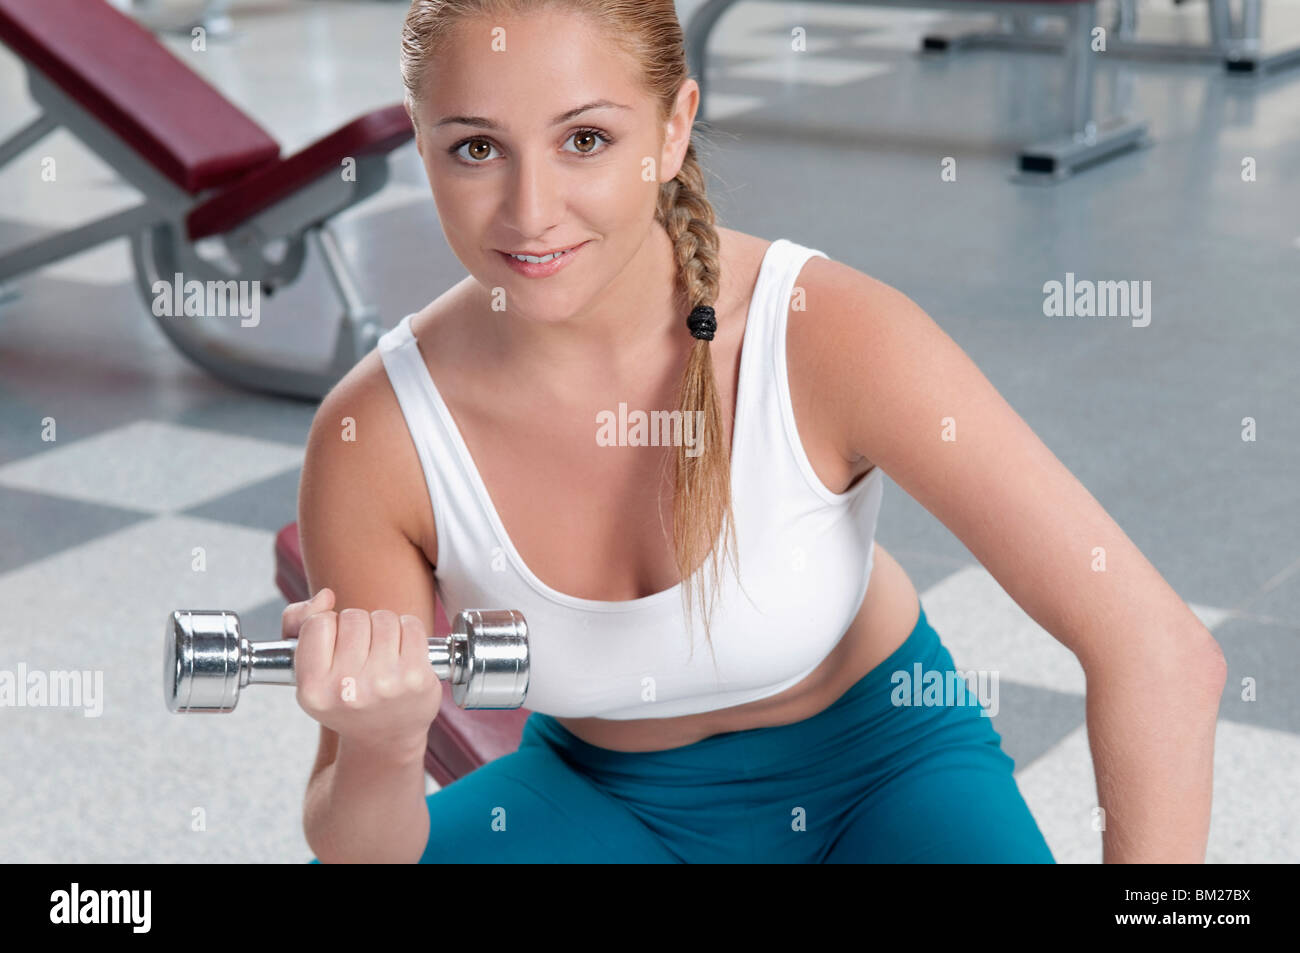 Portrait of a woman exercising with a dumbbell Stock Photo